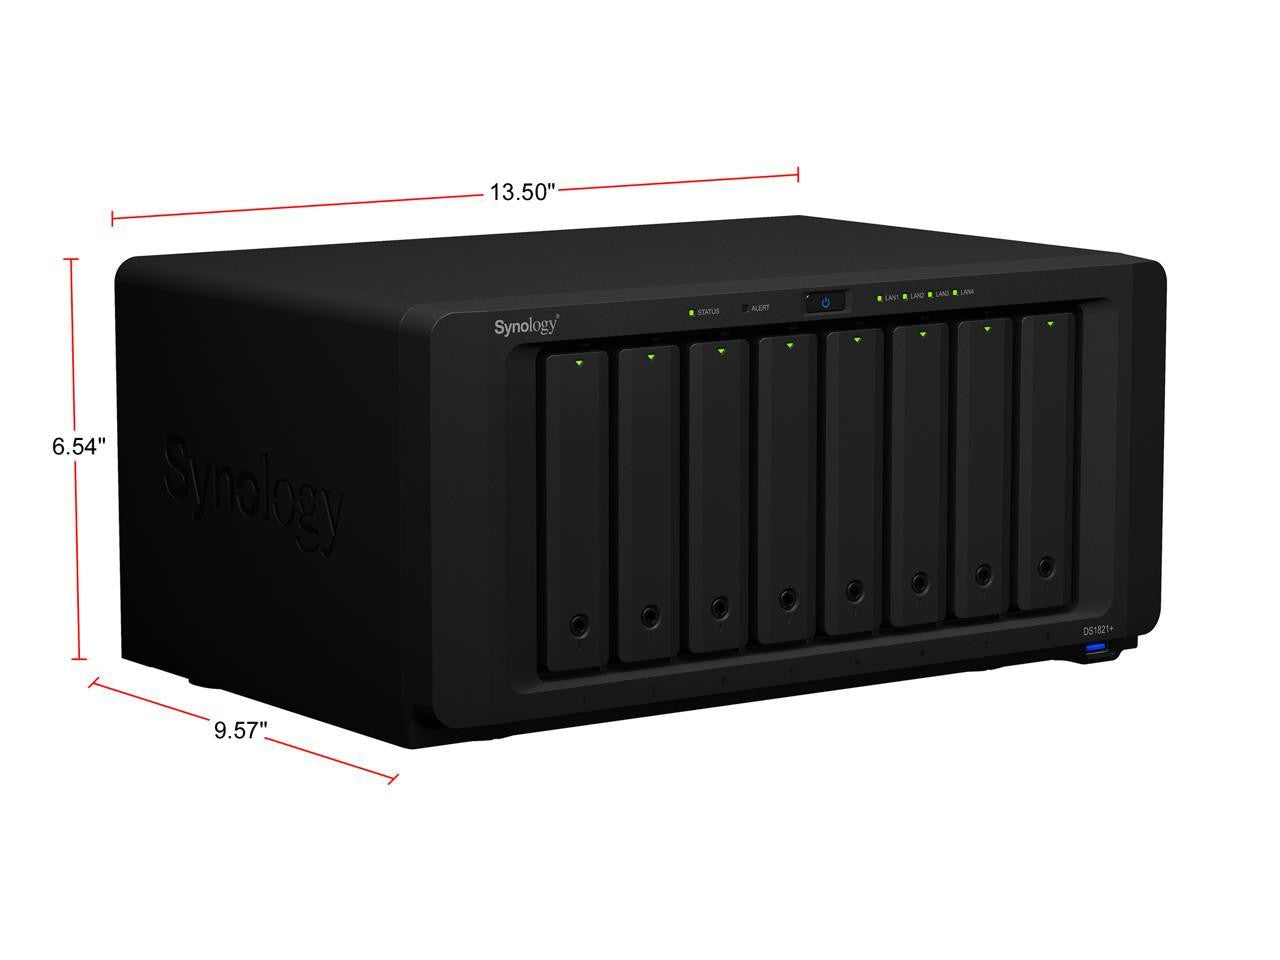 Synology DS1821+ 8-BAY DiskStation with 32GB Synology RAM and 80TB (8x10TB) Western Digital RED PLUS Drives Fully Assembled and Tested